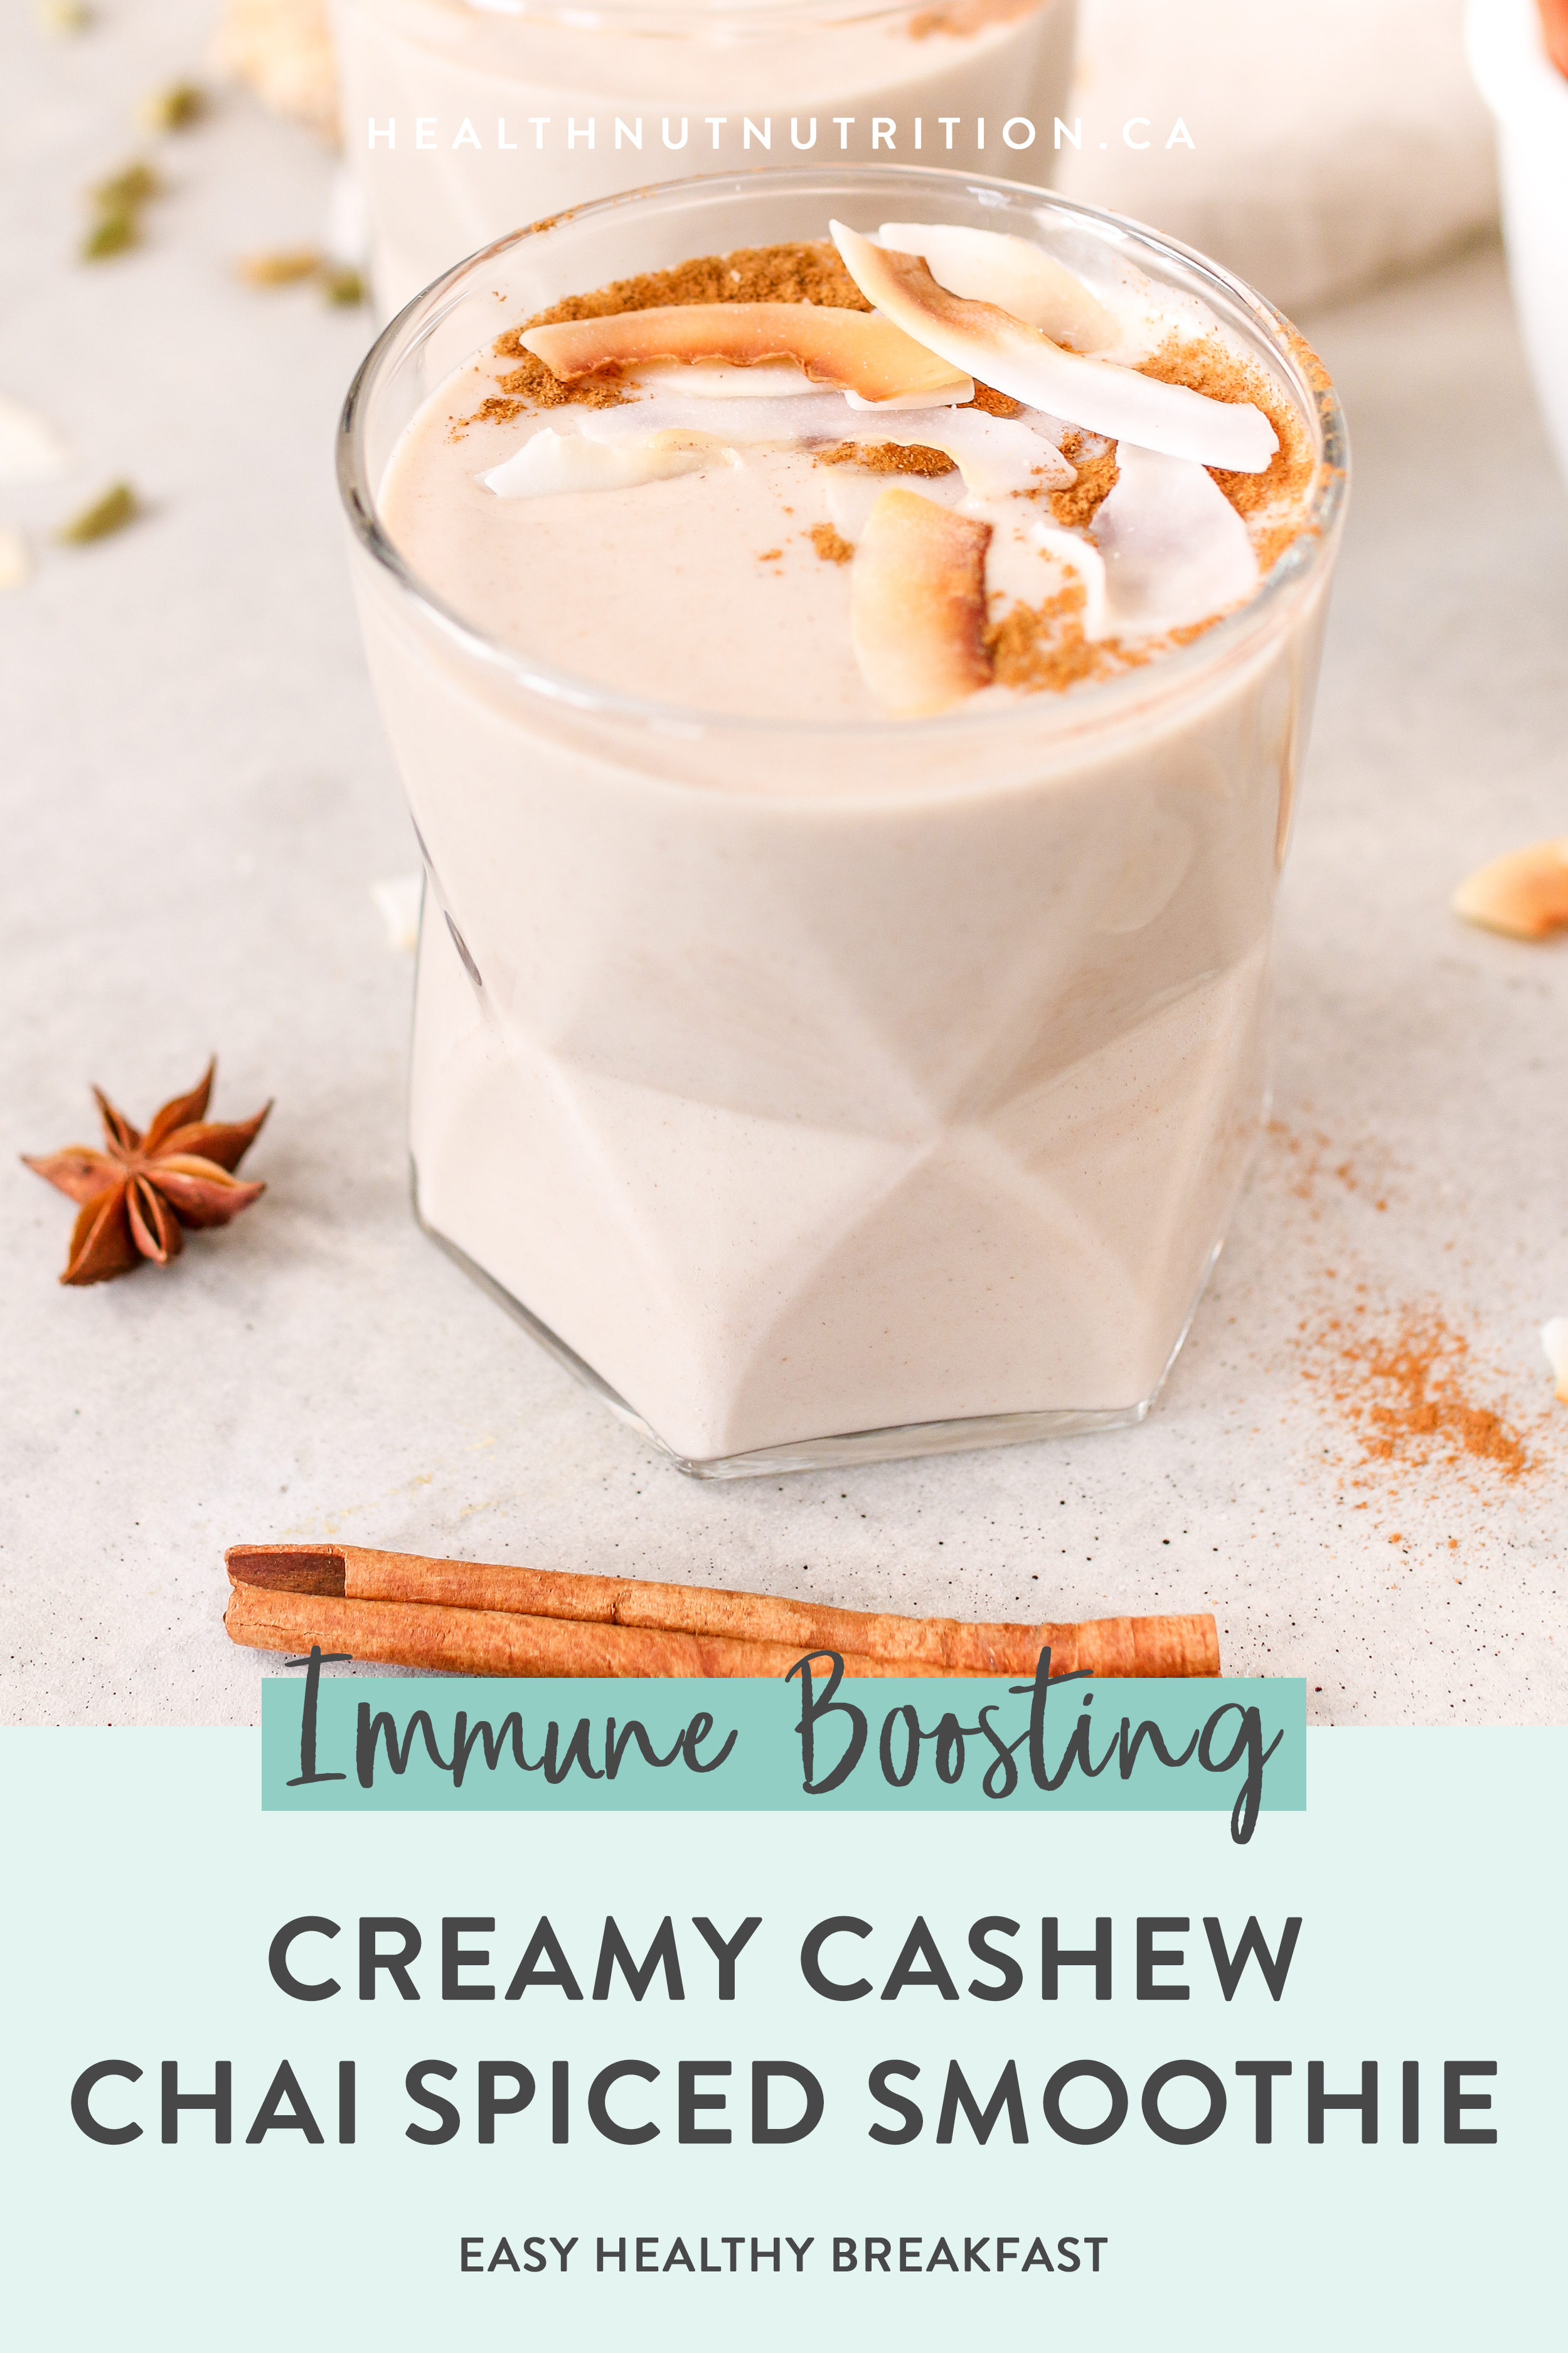 This Cashew Chai Spiced Smoothie is so creamy with warming spices like cinnamon, cardamom, nutmeg, and ginger. Ready in 5 minutes, this latte inspired smoothie for breakfast never looked so cozy!